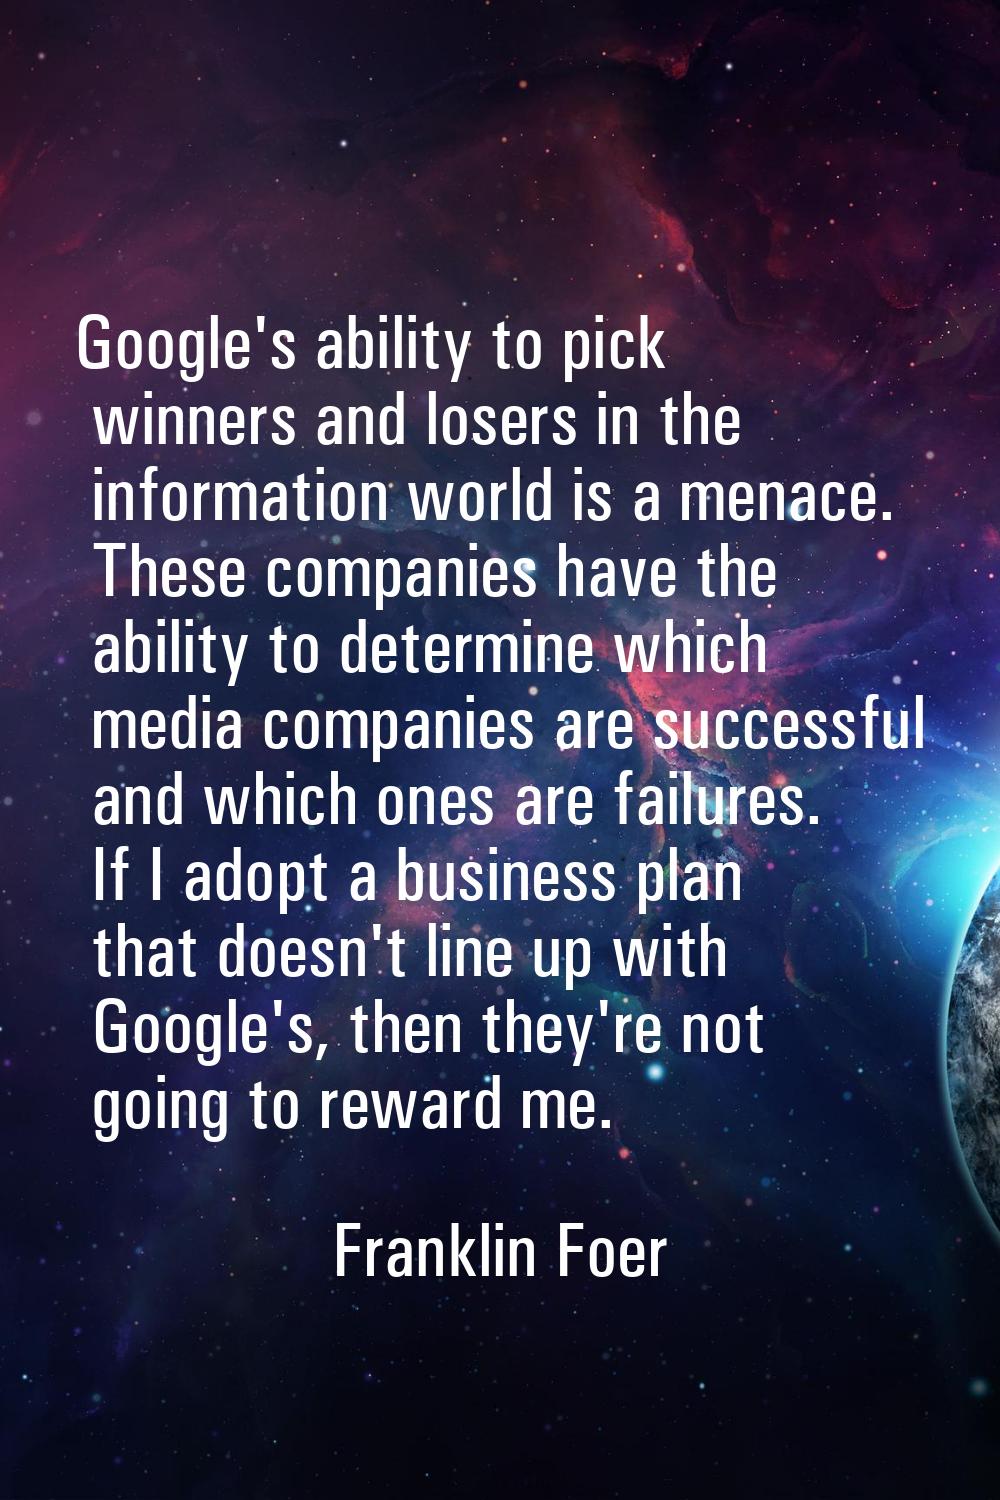 Google's ability to pick winners and losers in the information world is a menace. These companies h